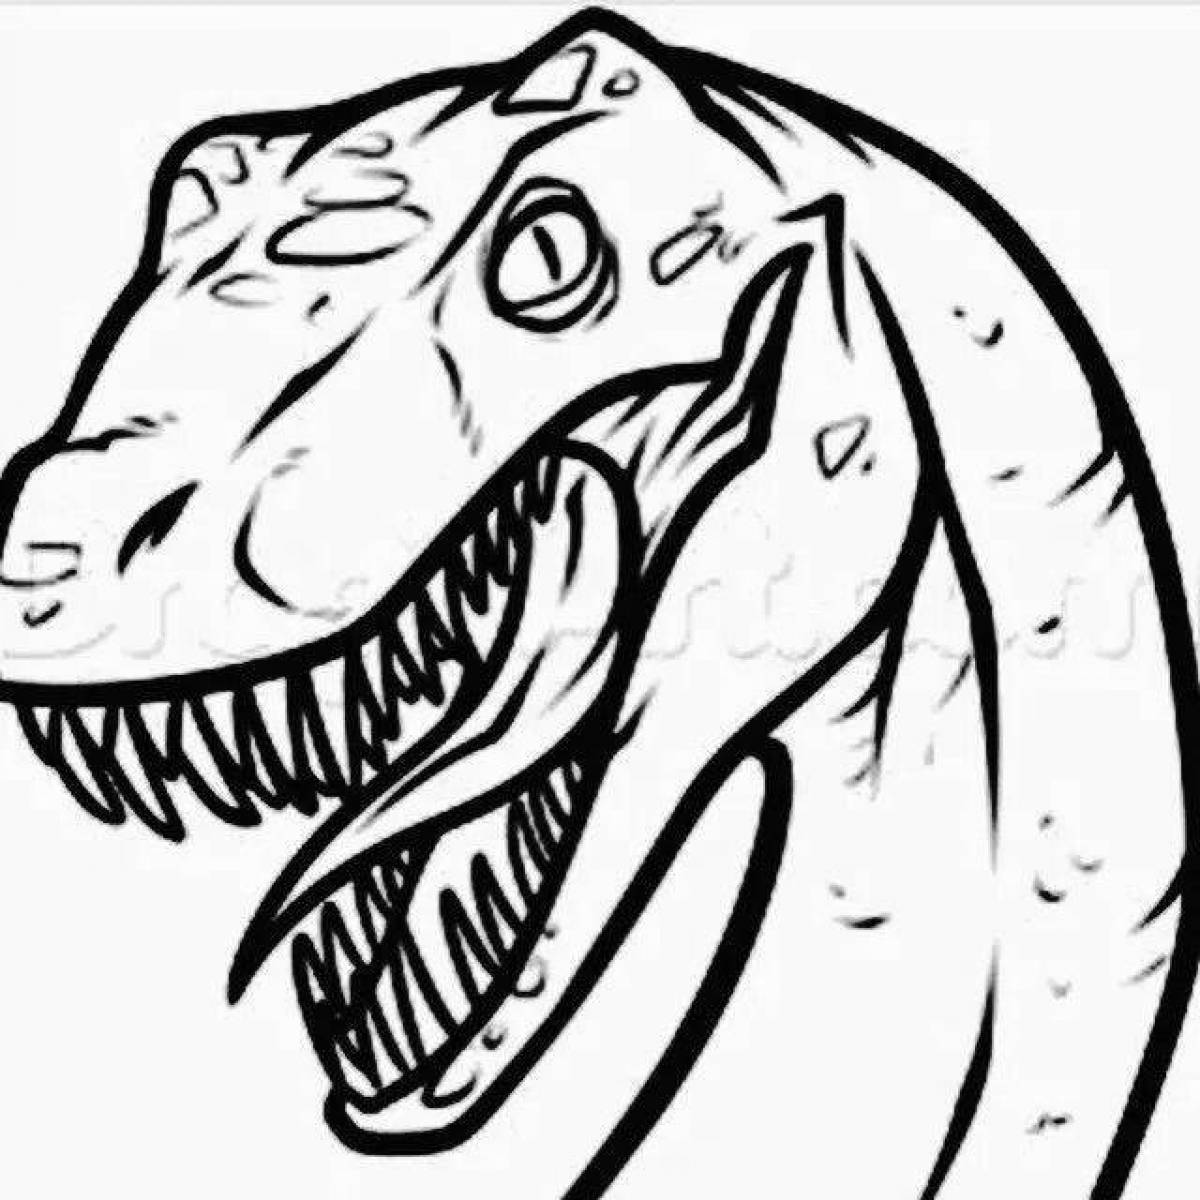 Lizard live mask coloring page